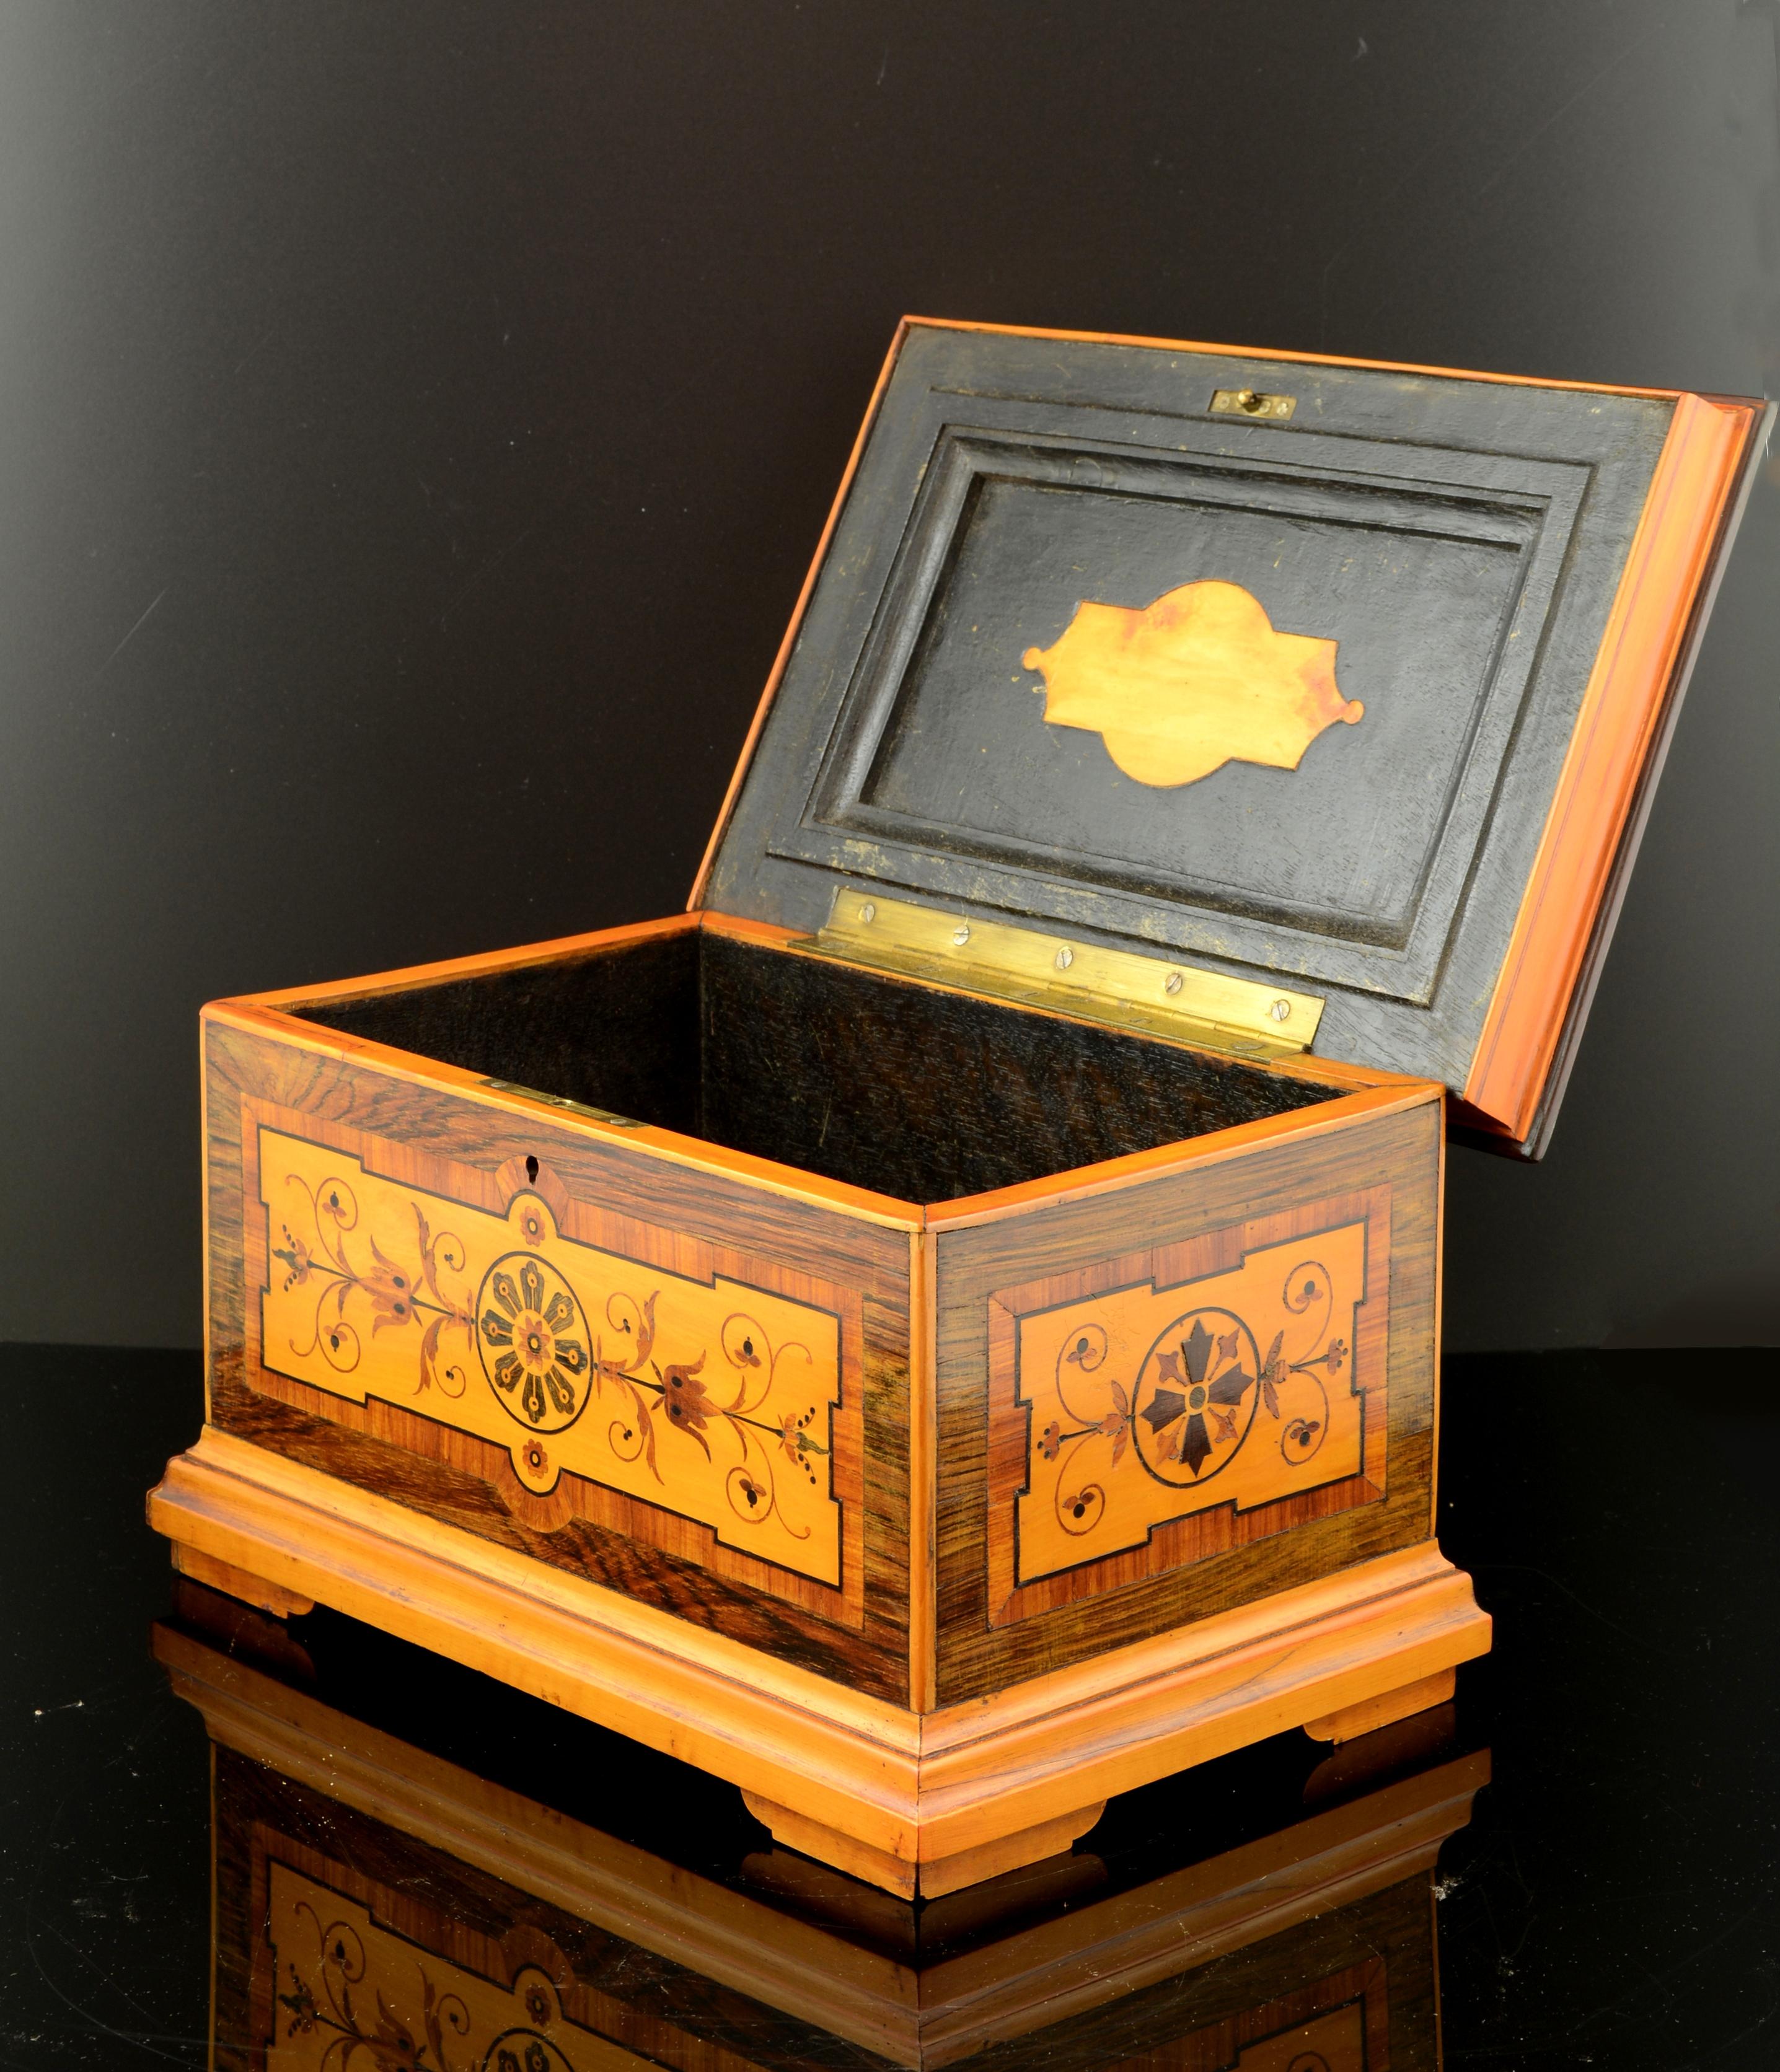 Box with marquetry decorations. Lemongrass, rosewood, palorosa, mahogany wood. XIX century.
Rectangular box with a flat top made of wood and decorated with a delicate marquetry with lemongrass, rosewood, palorosa and mahogany that has smooth